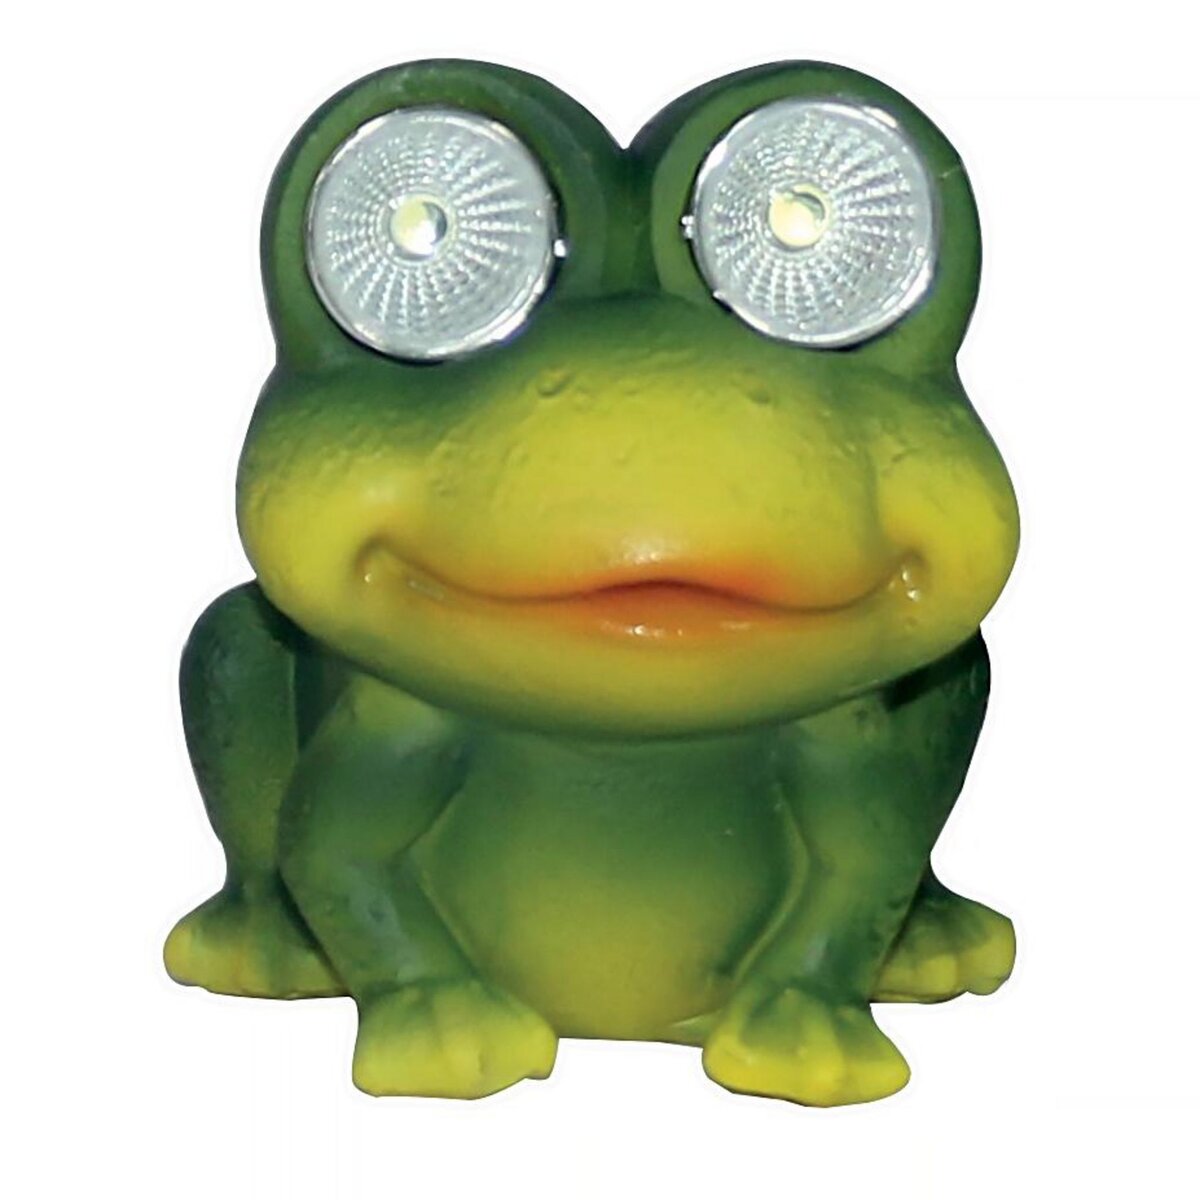  Grenouille solaire 2 LED